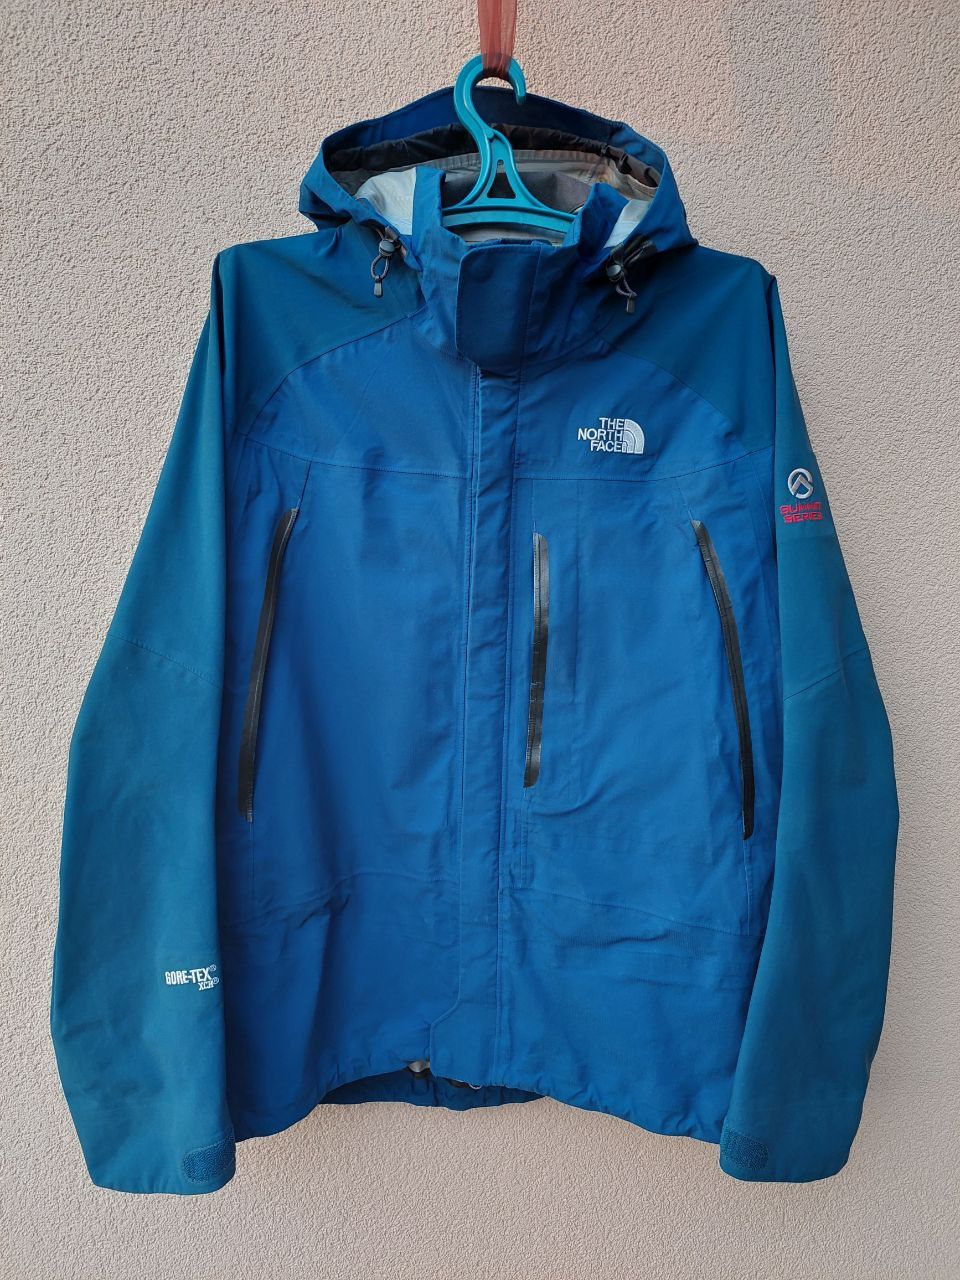 Pre-owned Goretex X The North Face Vintage Jacket The North Face Vintage Summit Series Blue Y2k (size Medium)